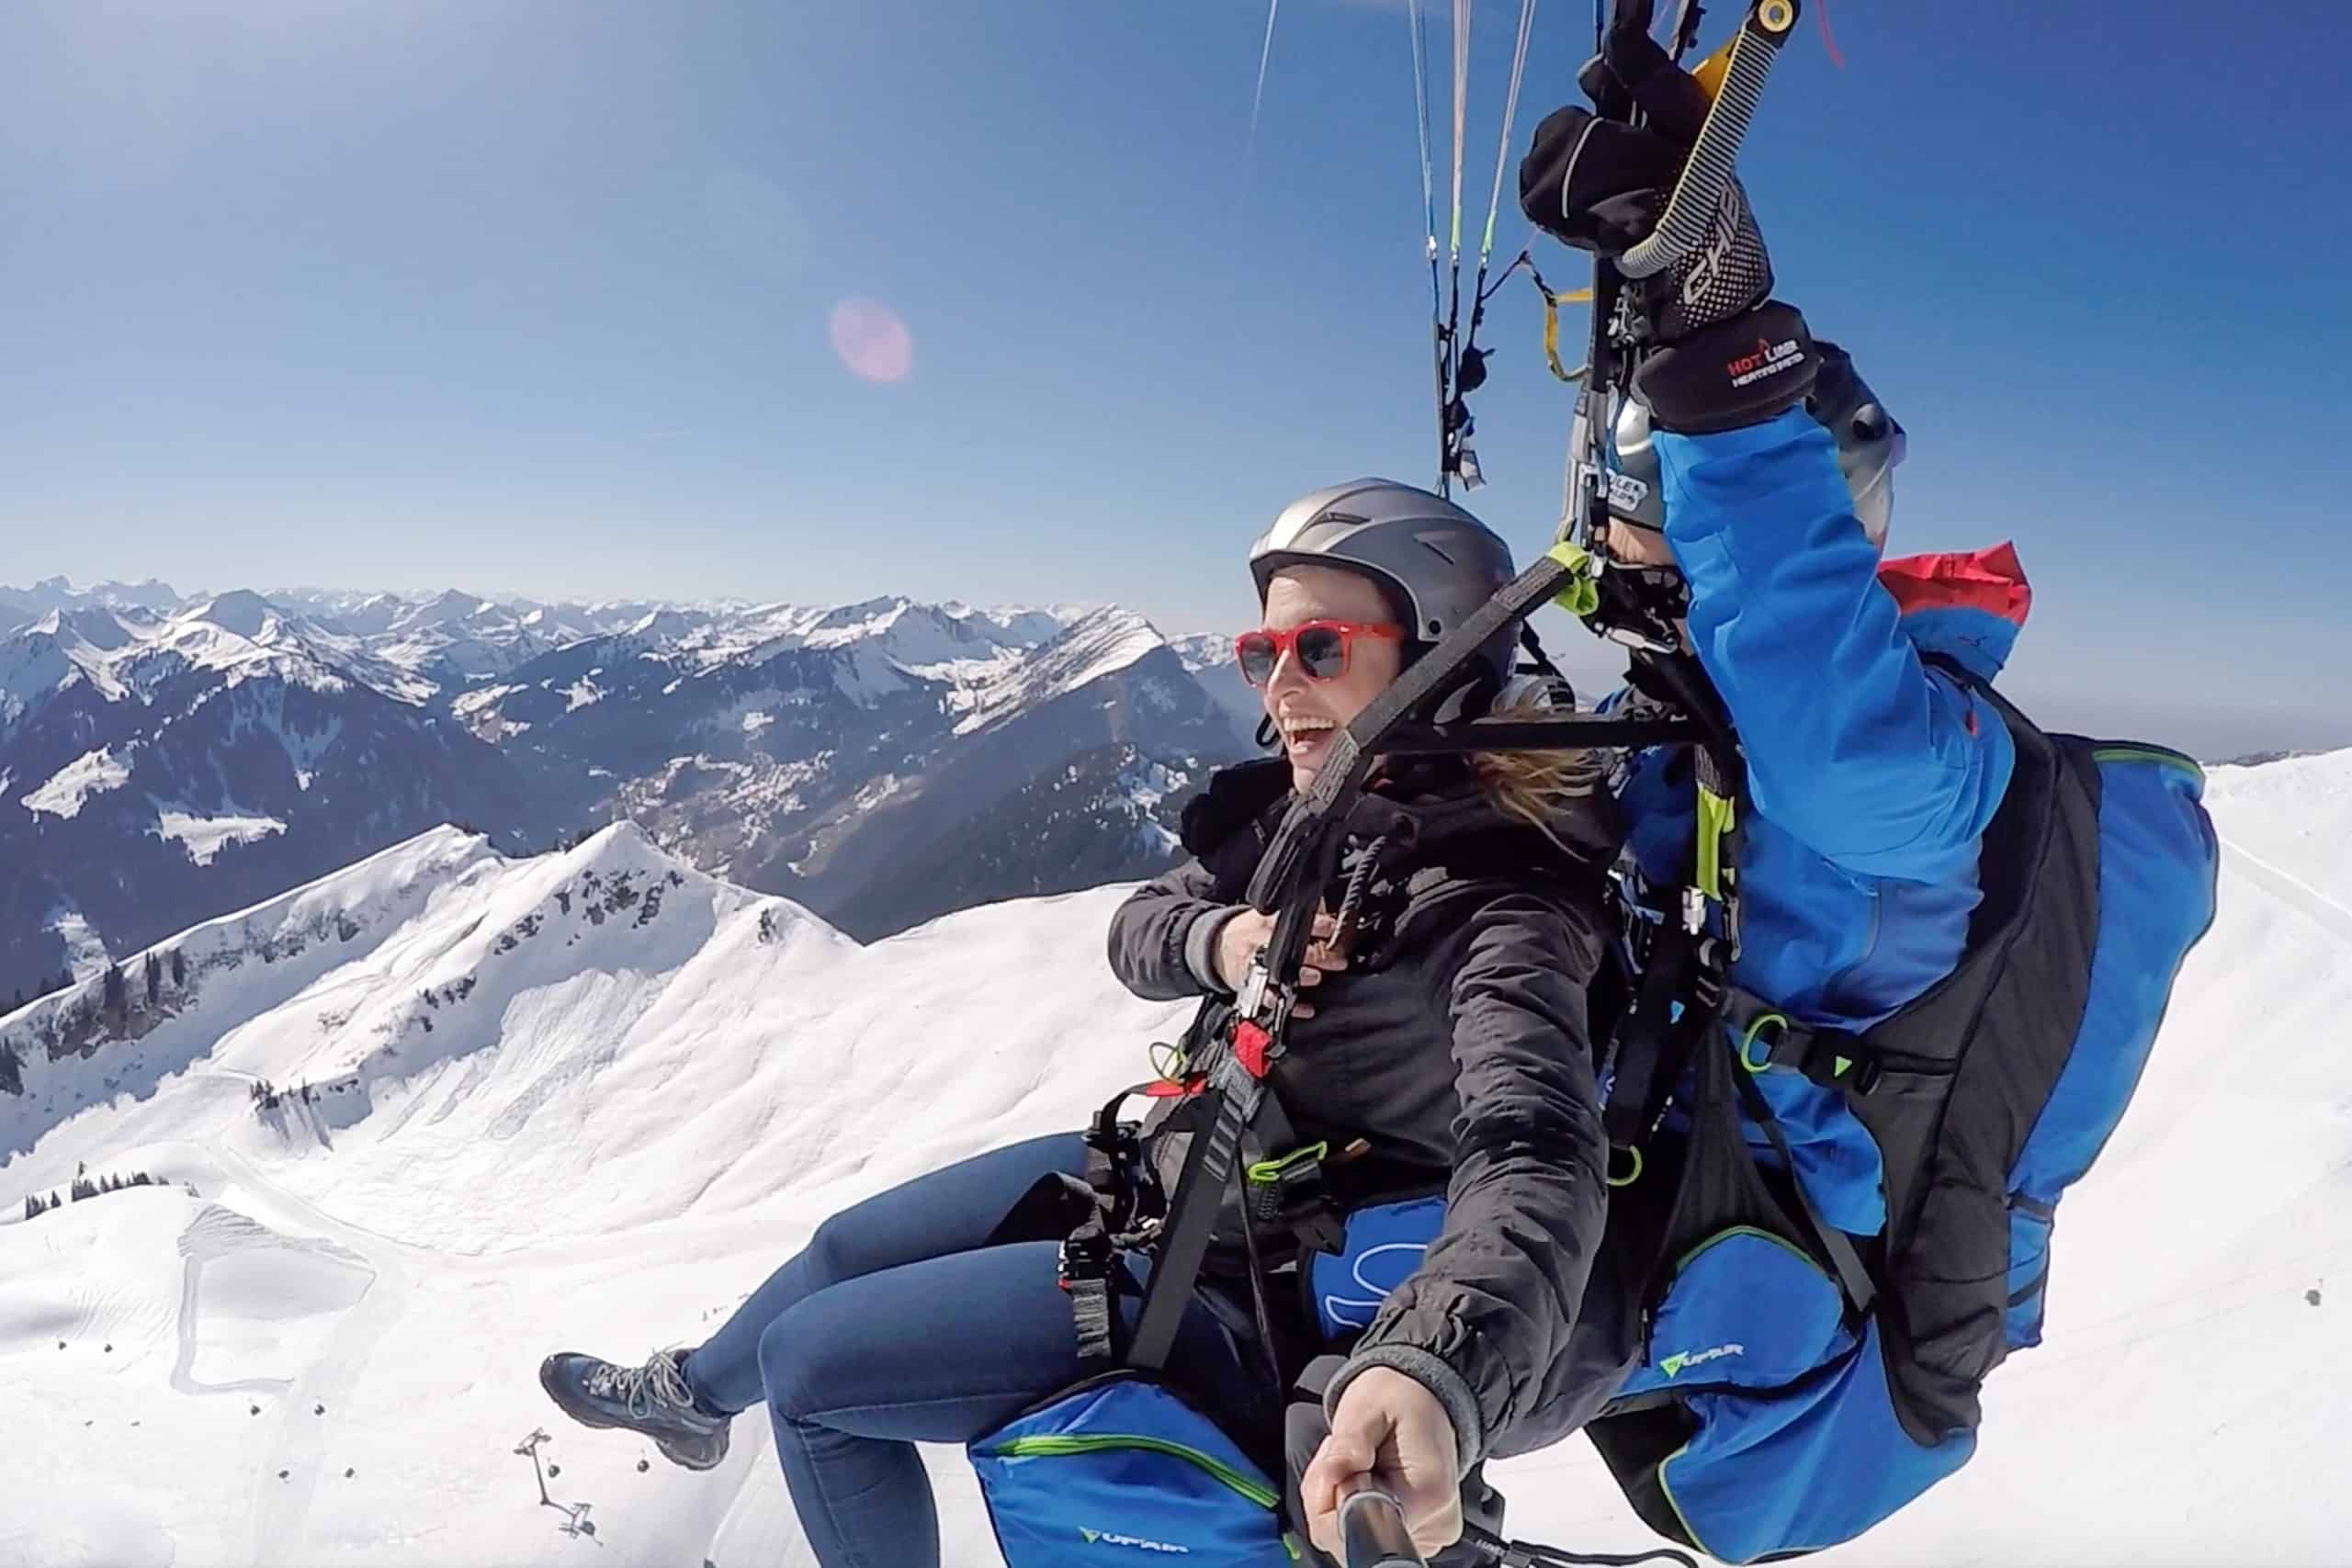 A woman paragliding in Austria with a male pilot behind her and the snow peaked Austrian Alps in the background